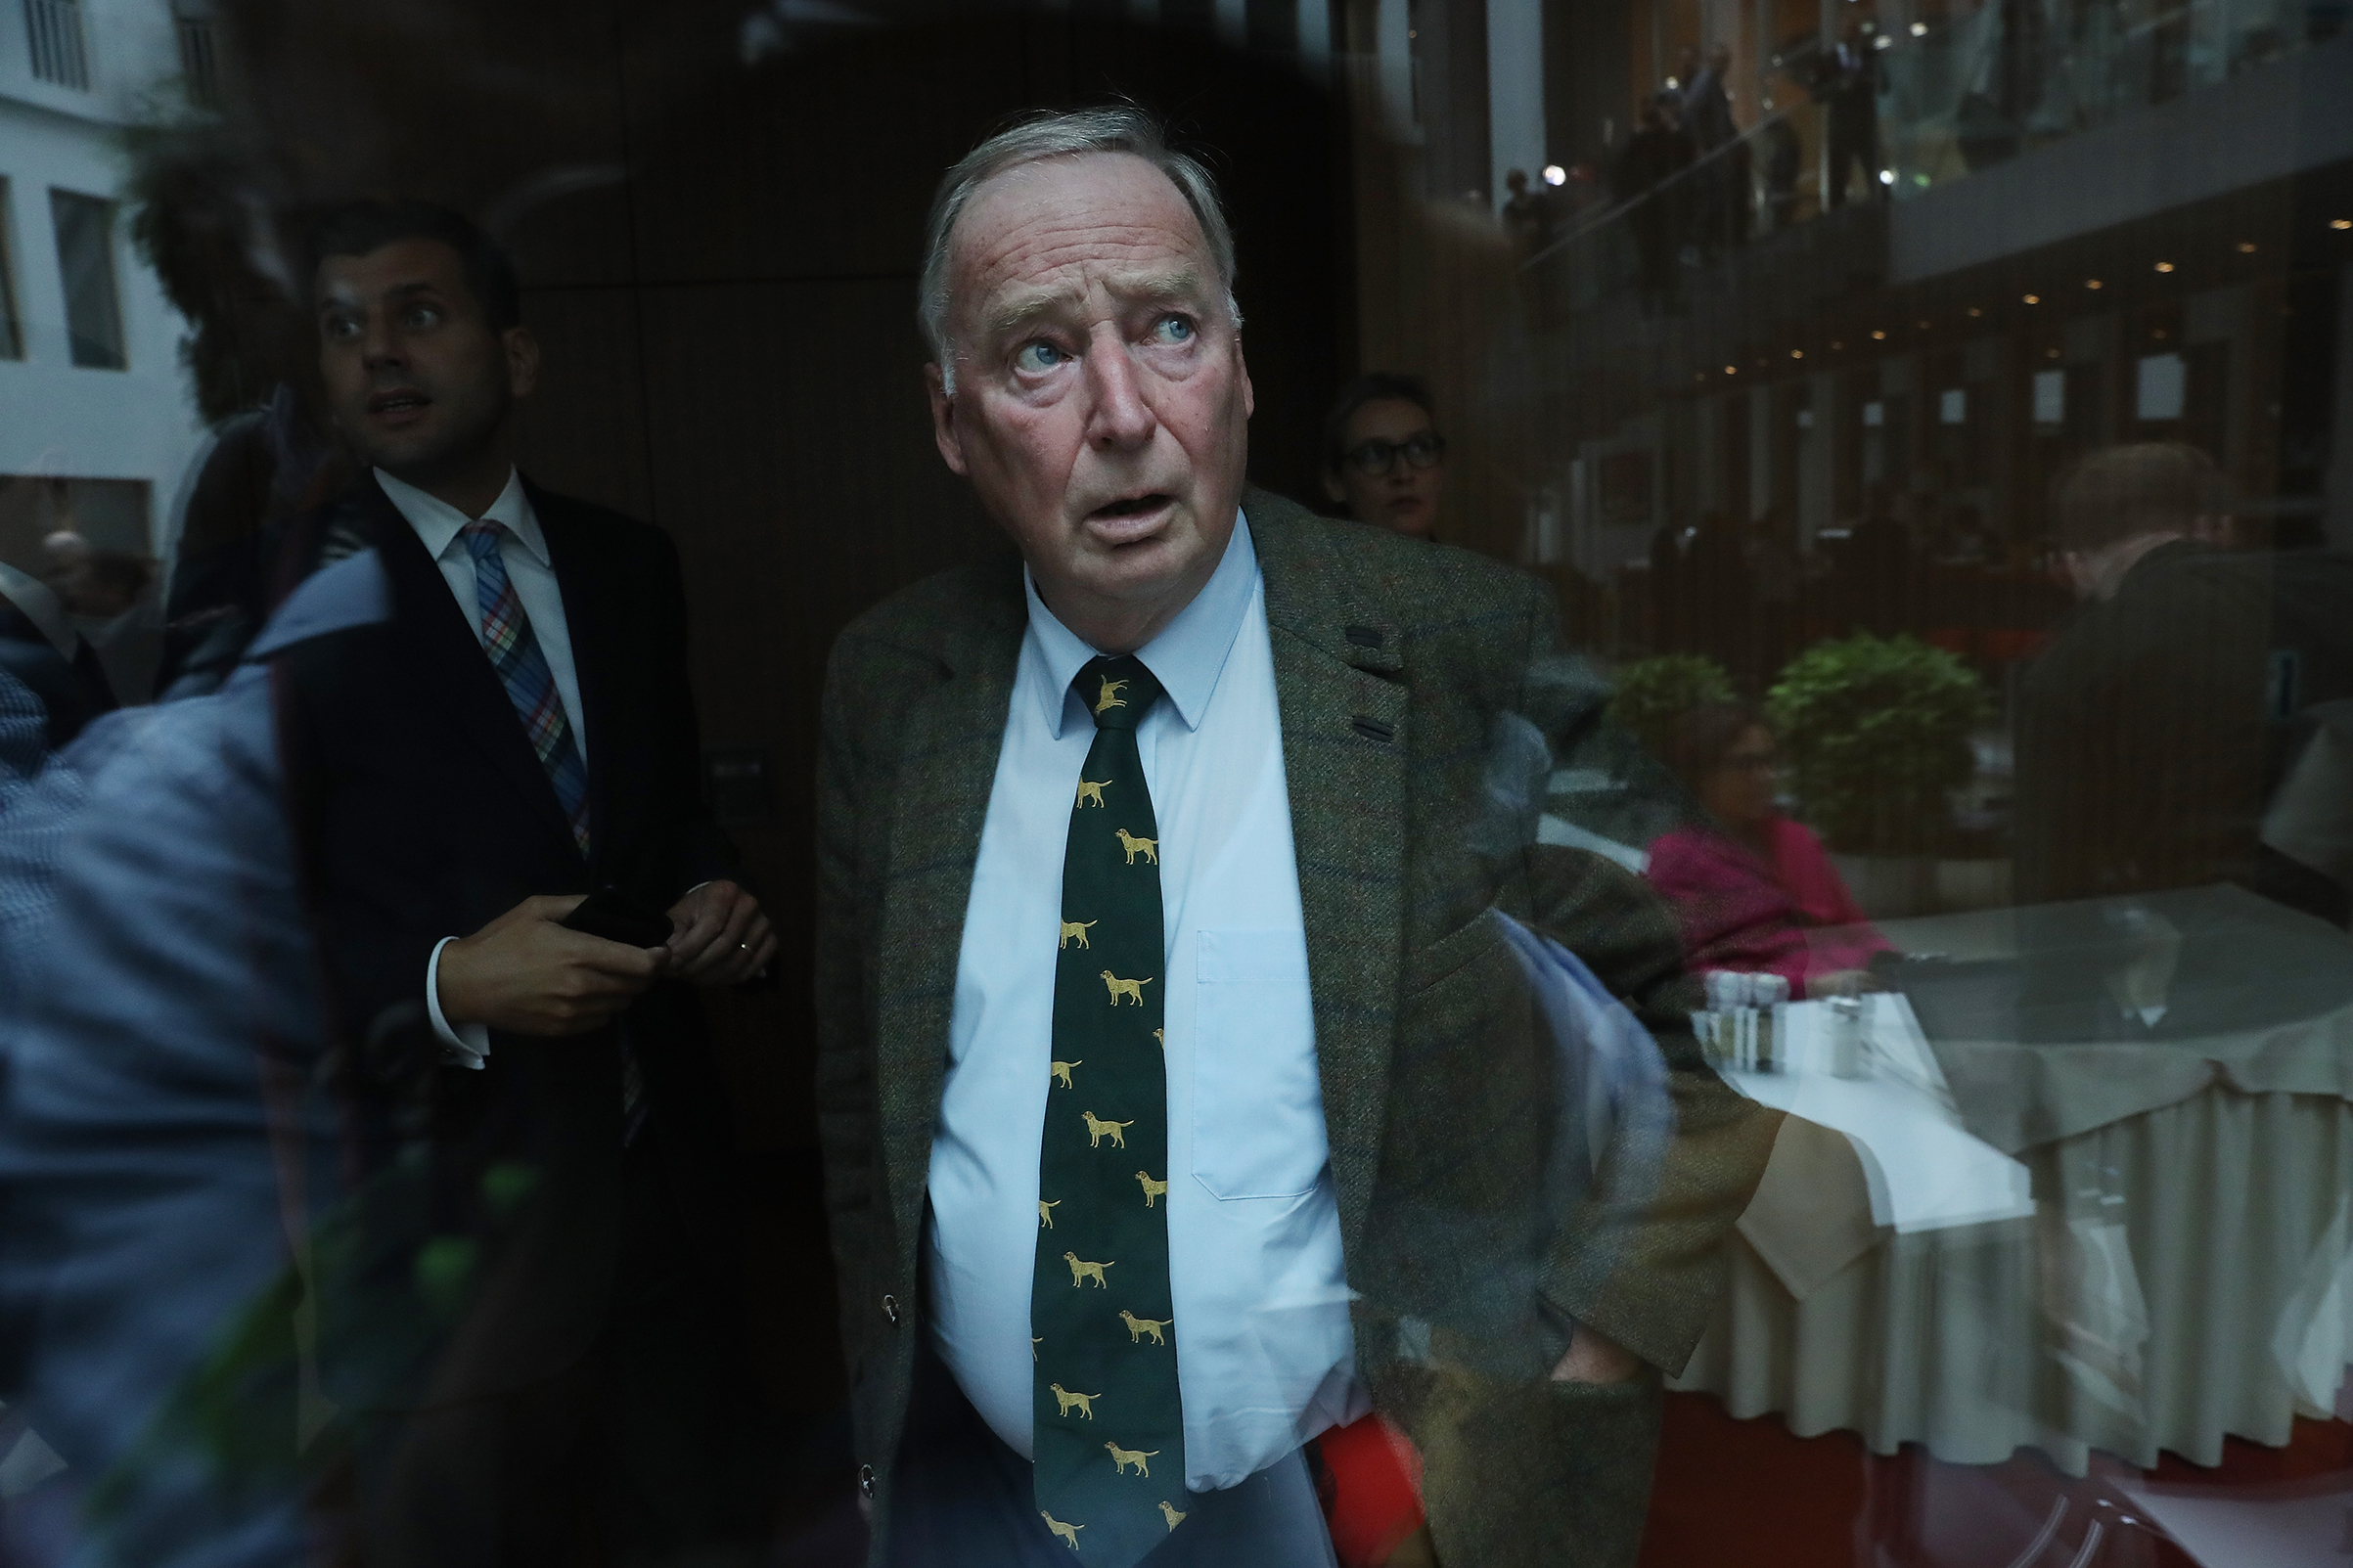 Alexander Gauland, who was a co-lead candidate of the right-wing Alternative for Germany (AfD) party in the German federal elections, is seen through glass following a news conference in Berlin on Sept. 25, 2017. At the conference, AfD member Frauke Petry announced she would quit the party in a surprise move. (Sean Gallup—Getty Images)